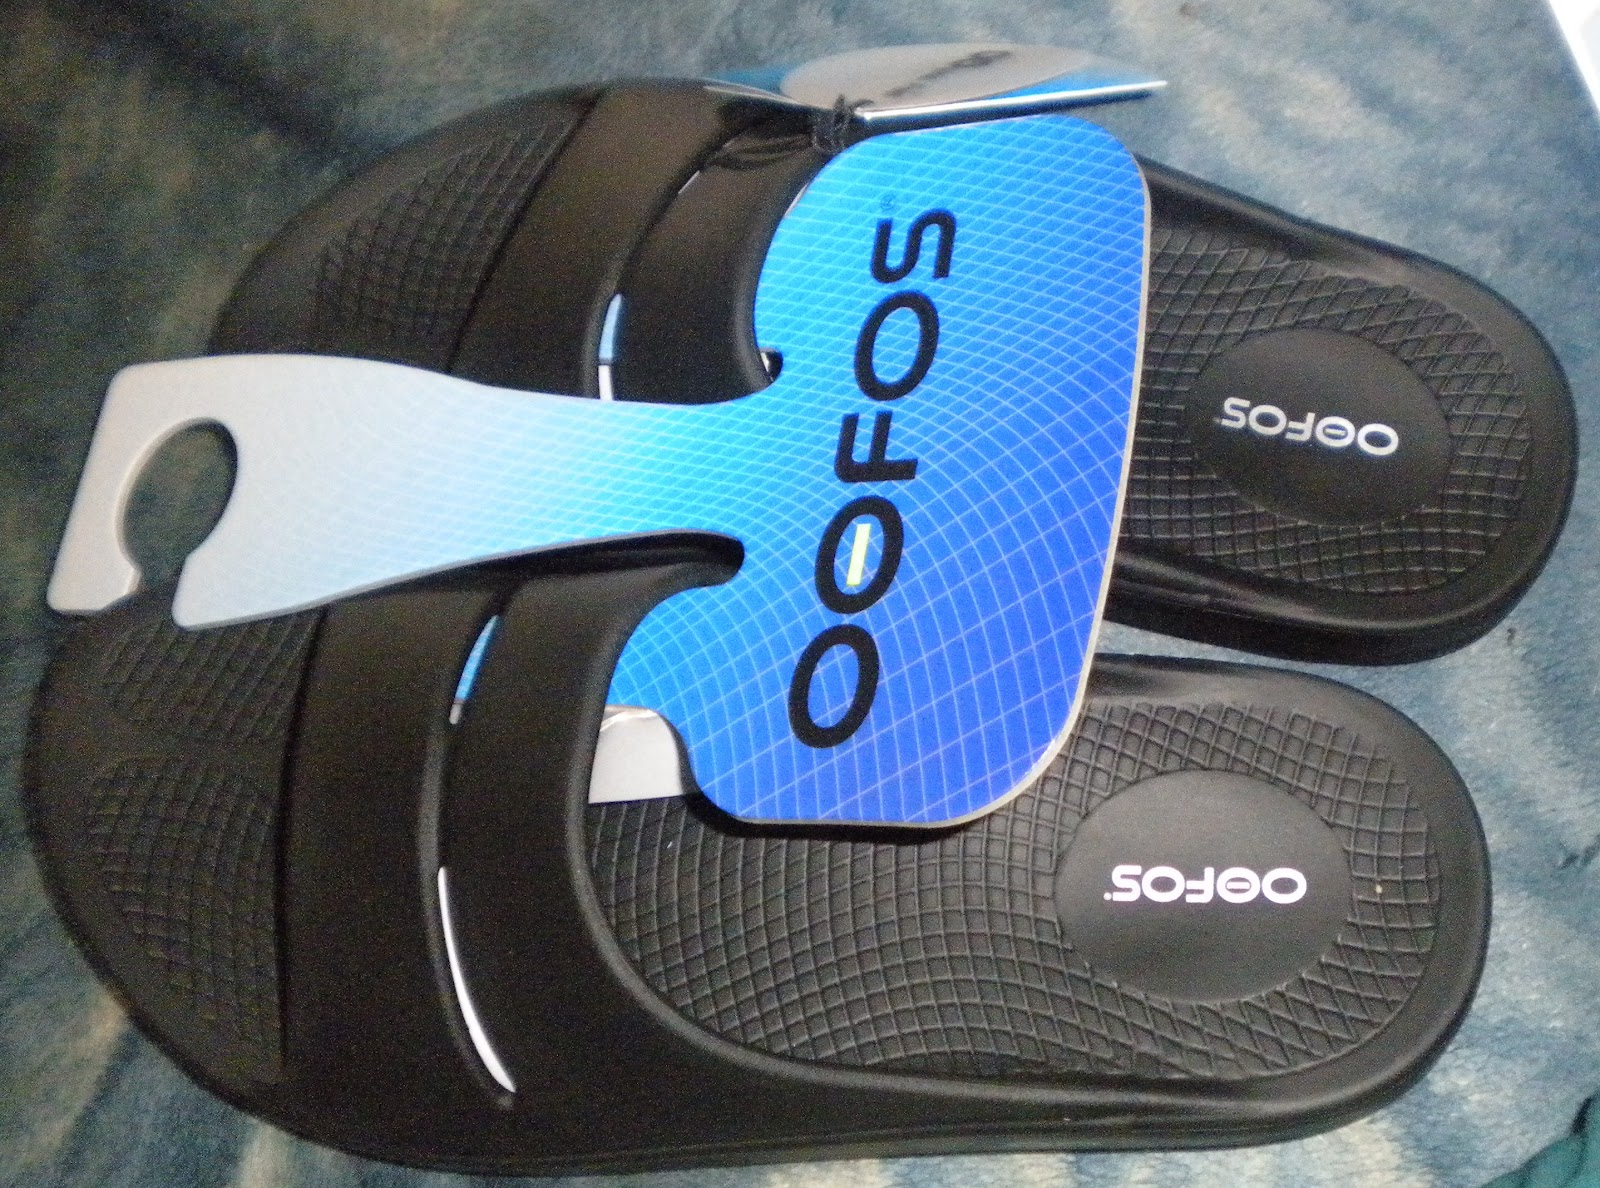 SaraLee's Deals Steals & Giveaways: OOFOS Sandal Review & Giveaway ends